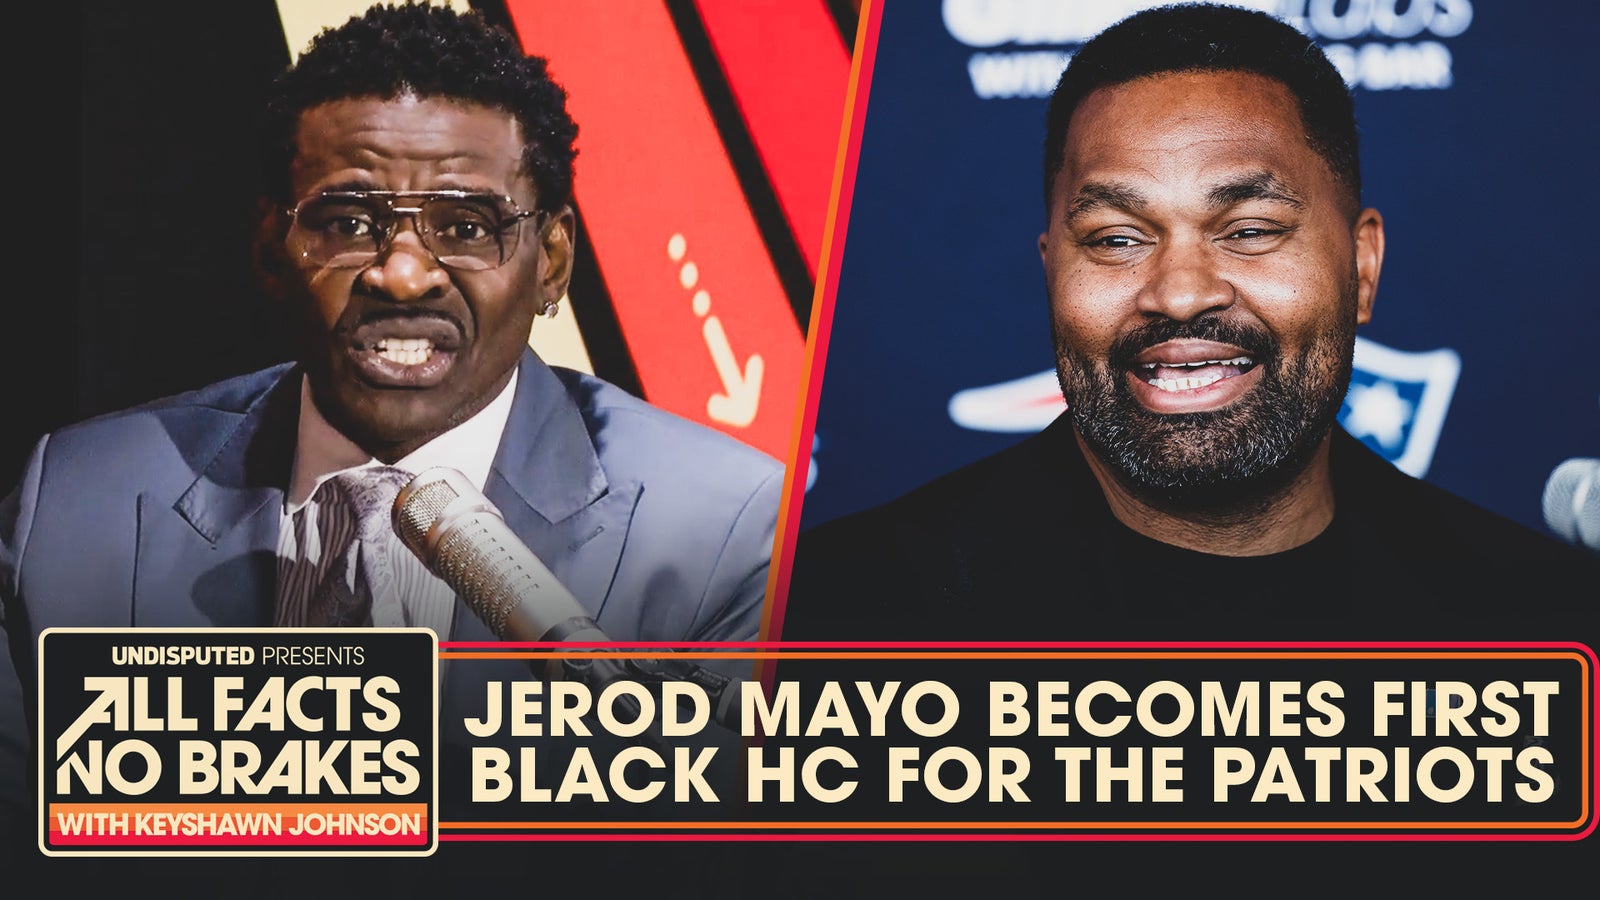 Michael Irvin: Jerod Mayo will bring Patriots into the ‘new age' 